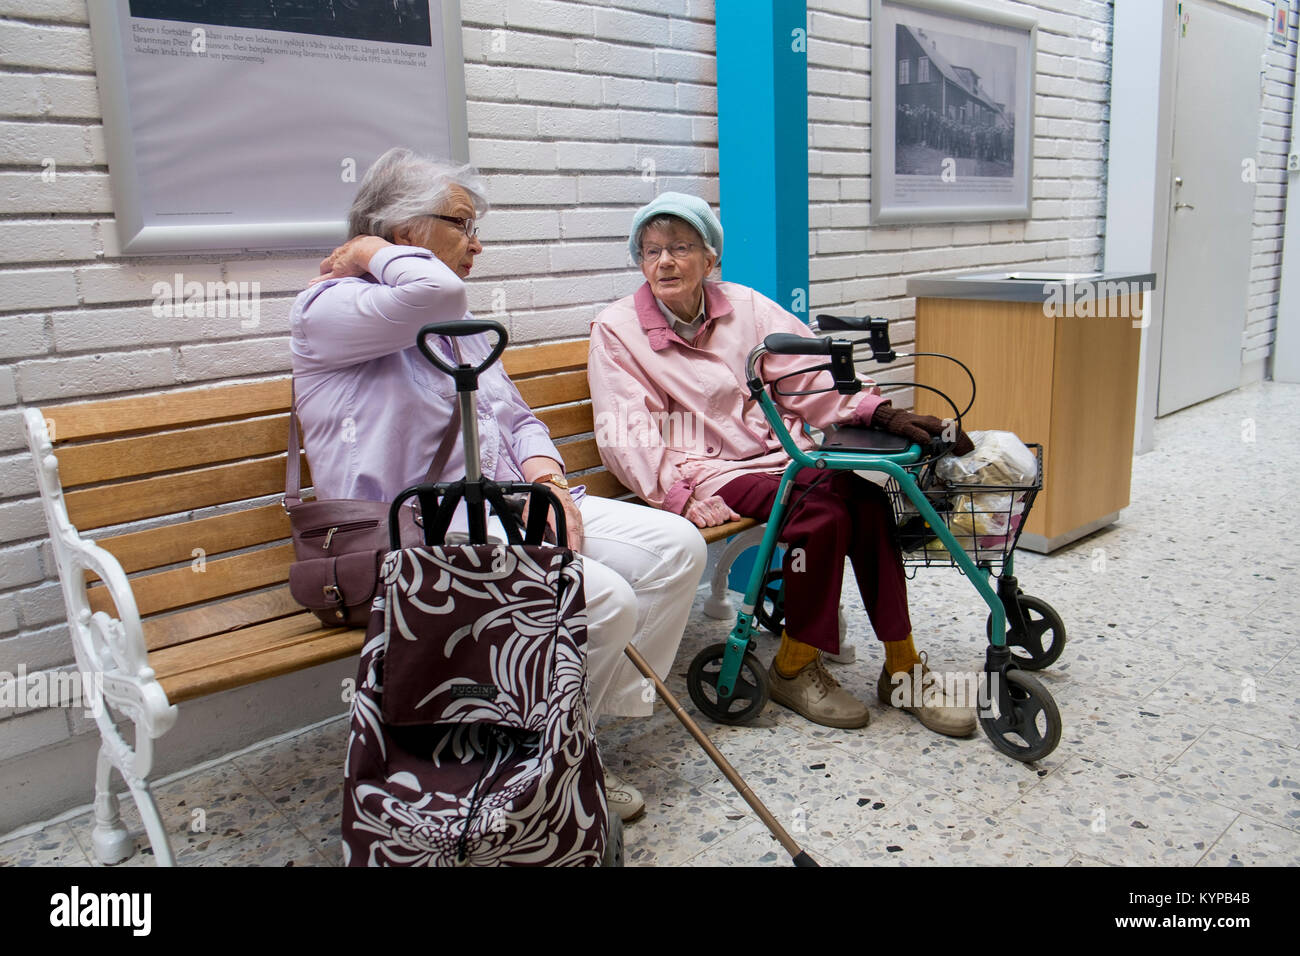 Seniors with walker sit and discuss, Upplands Väsby, Sweden. Stock Photo